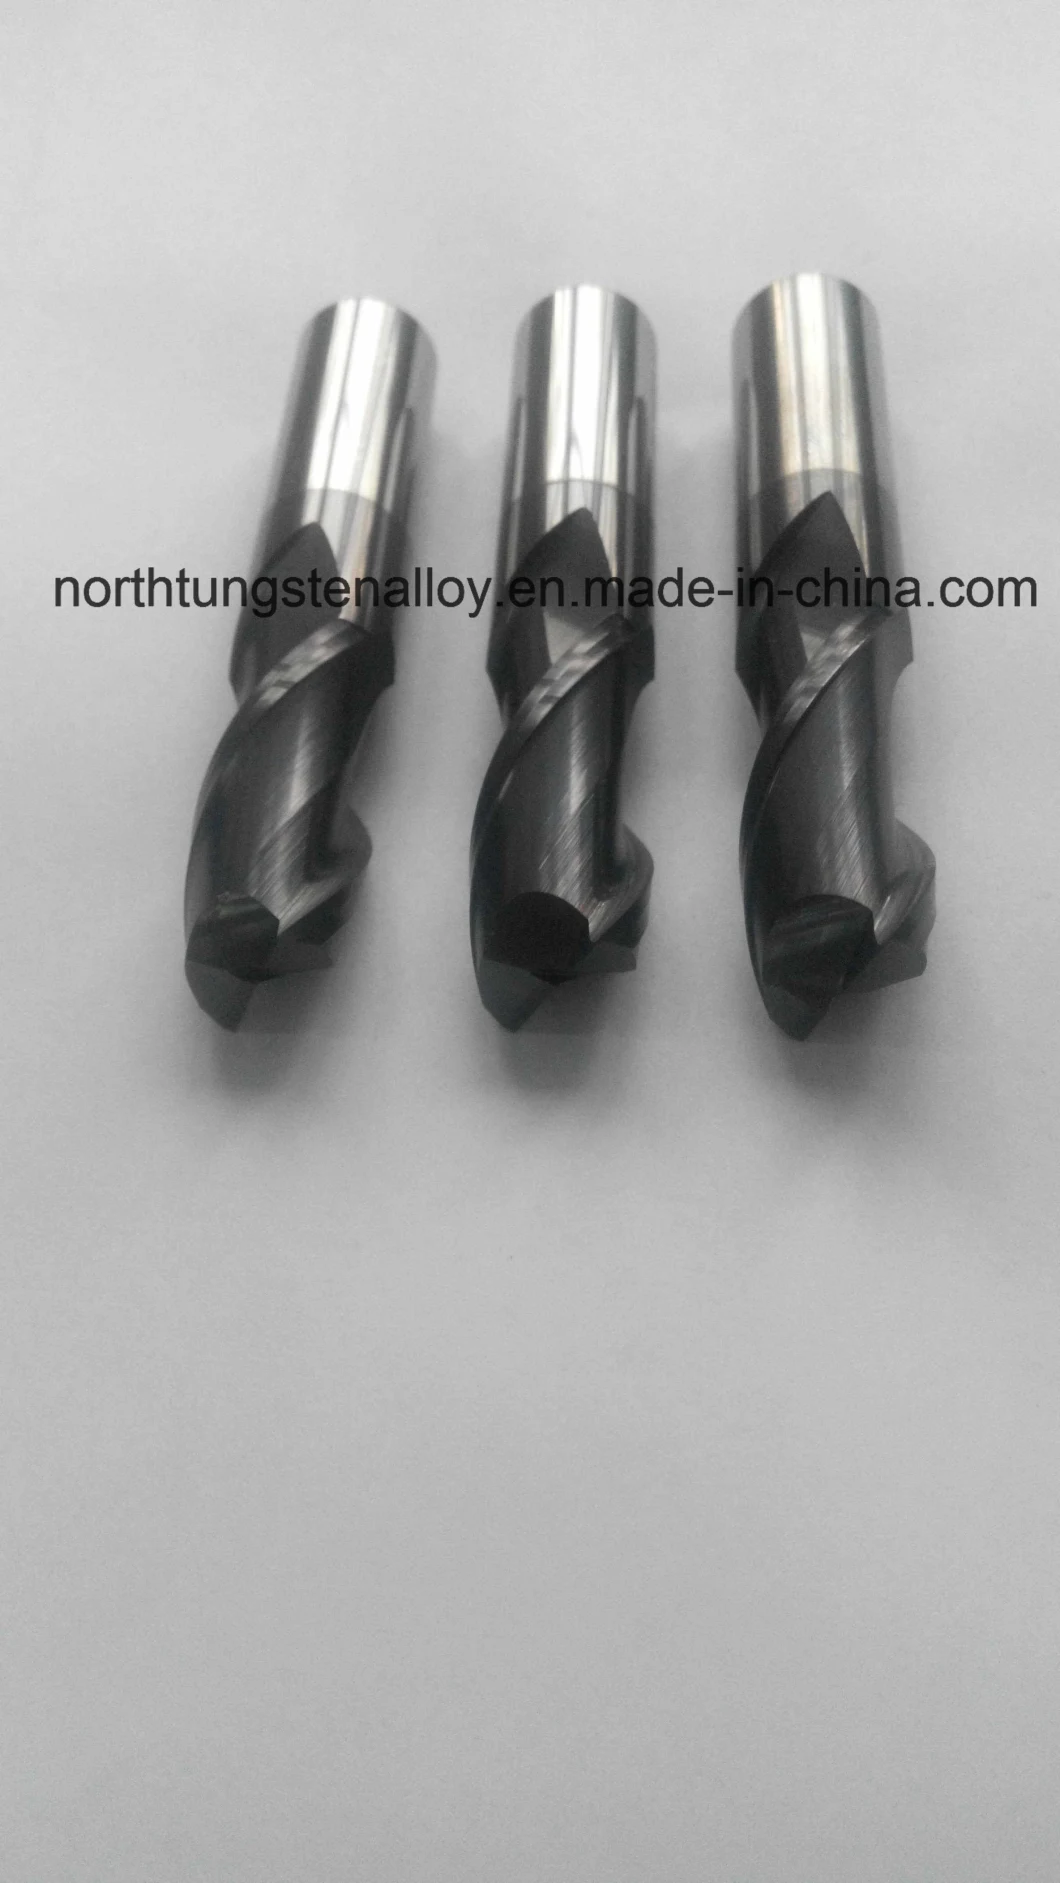 Solid Carbide Milling End Mill Cutters for CNC Machines